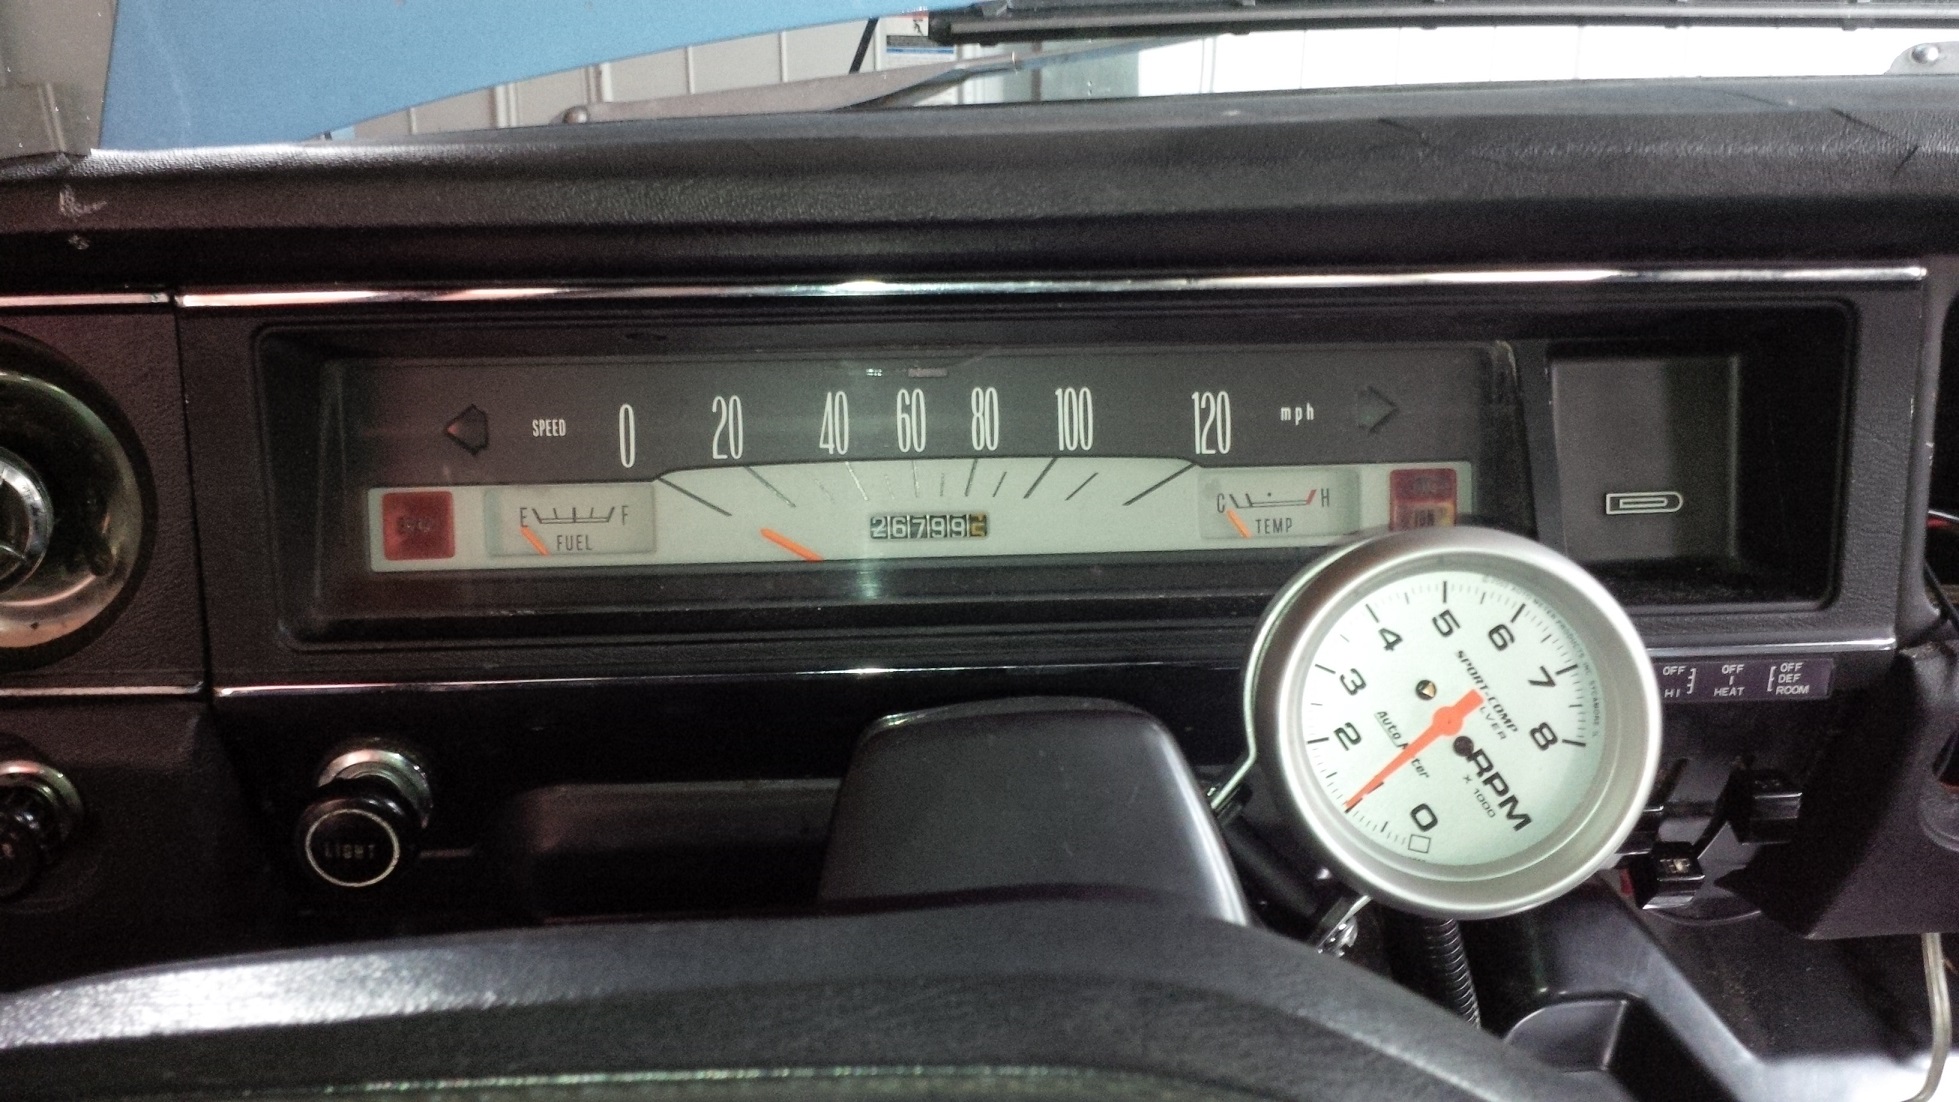 the new tach installed